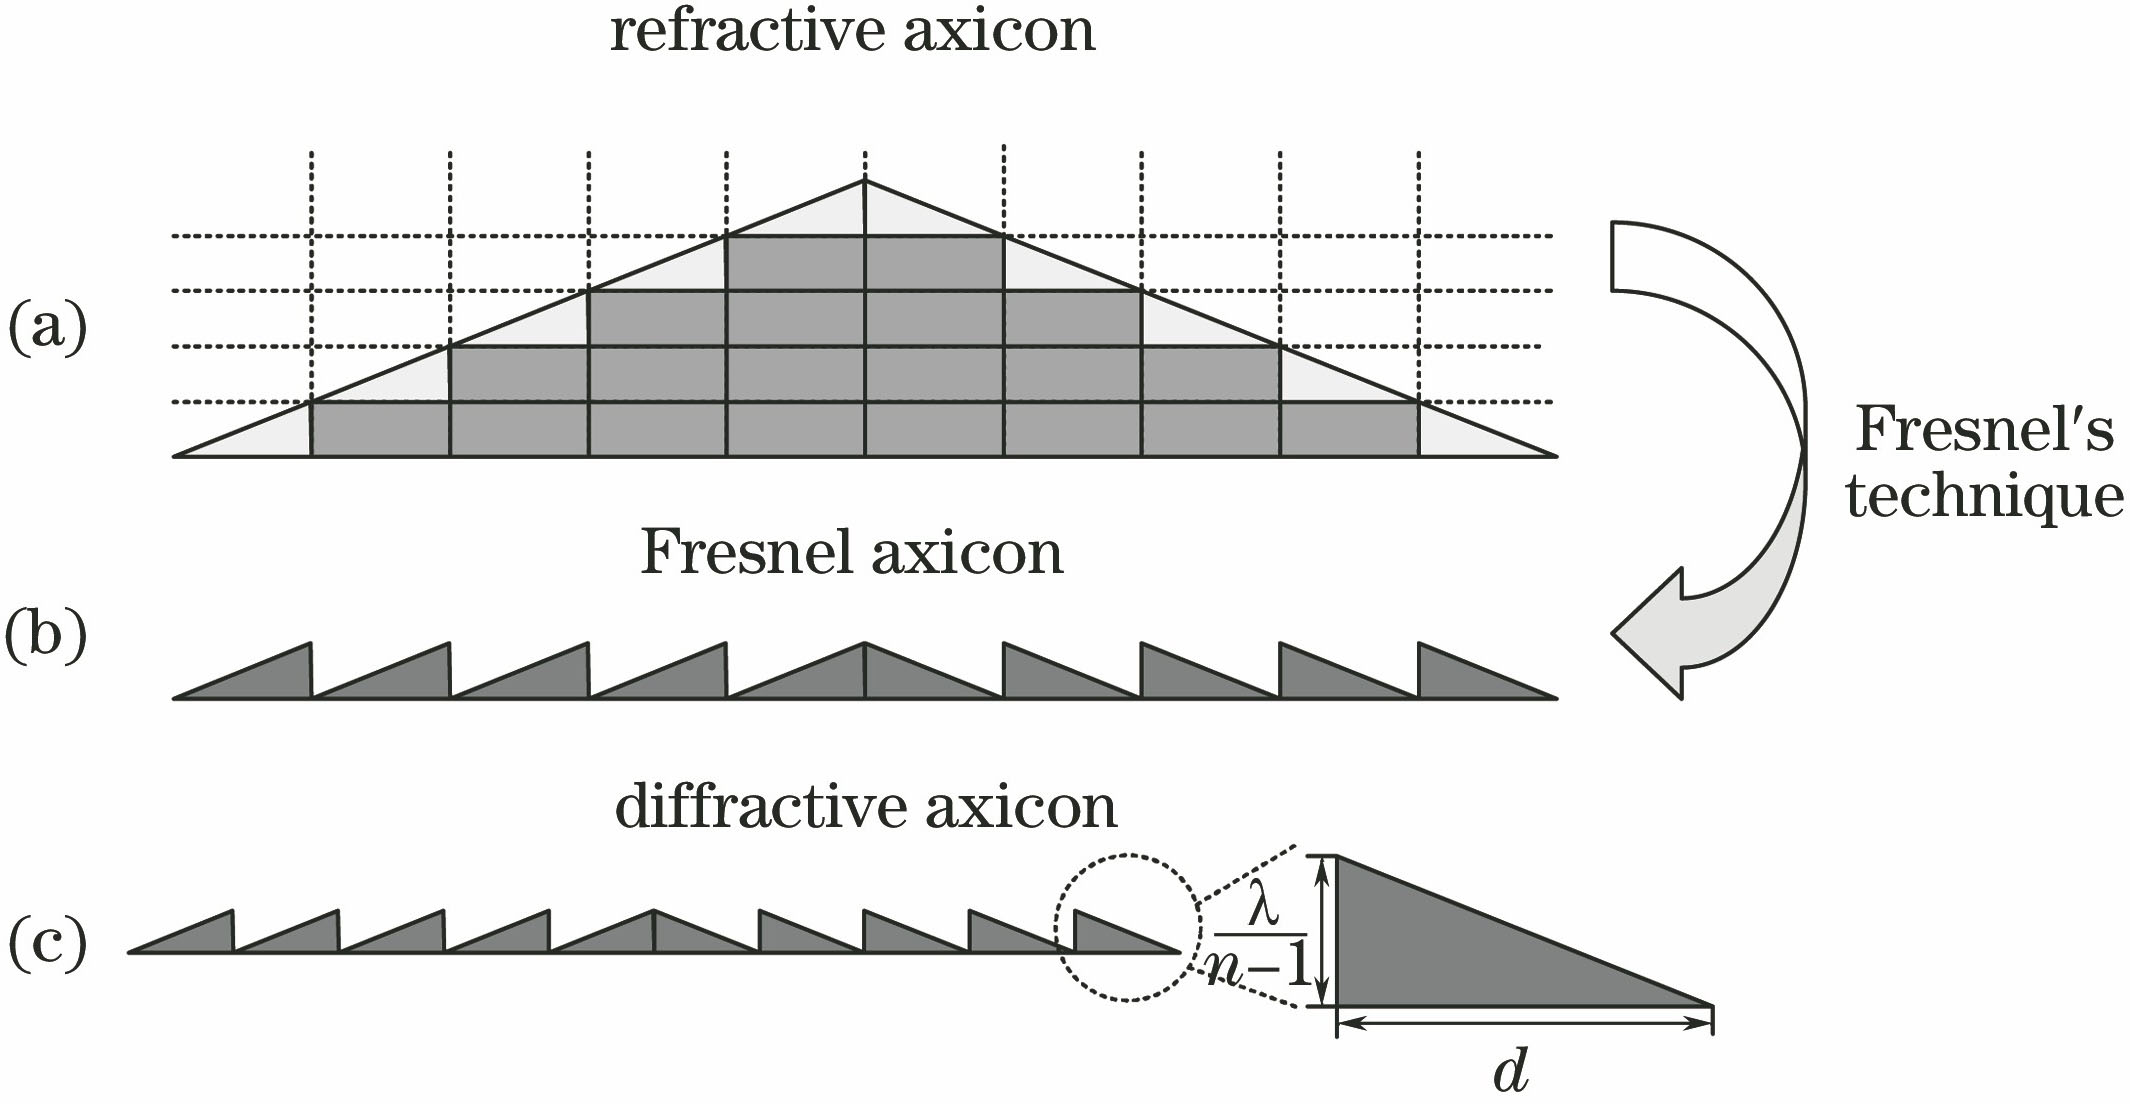 Schematic of phase compression of axicon. (a) Refractive axicon; (b) Fresnel axicon; (c) diffractive axicon